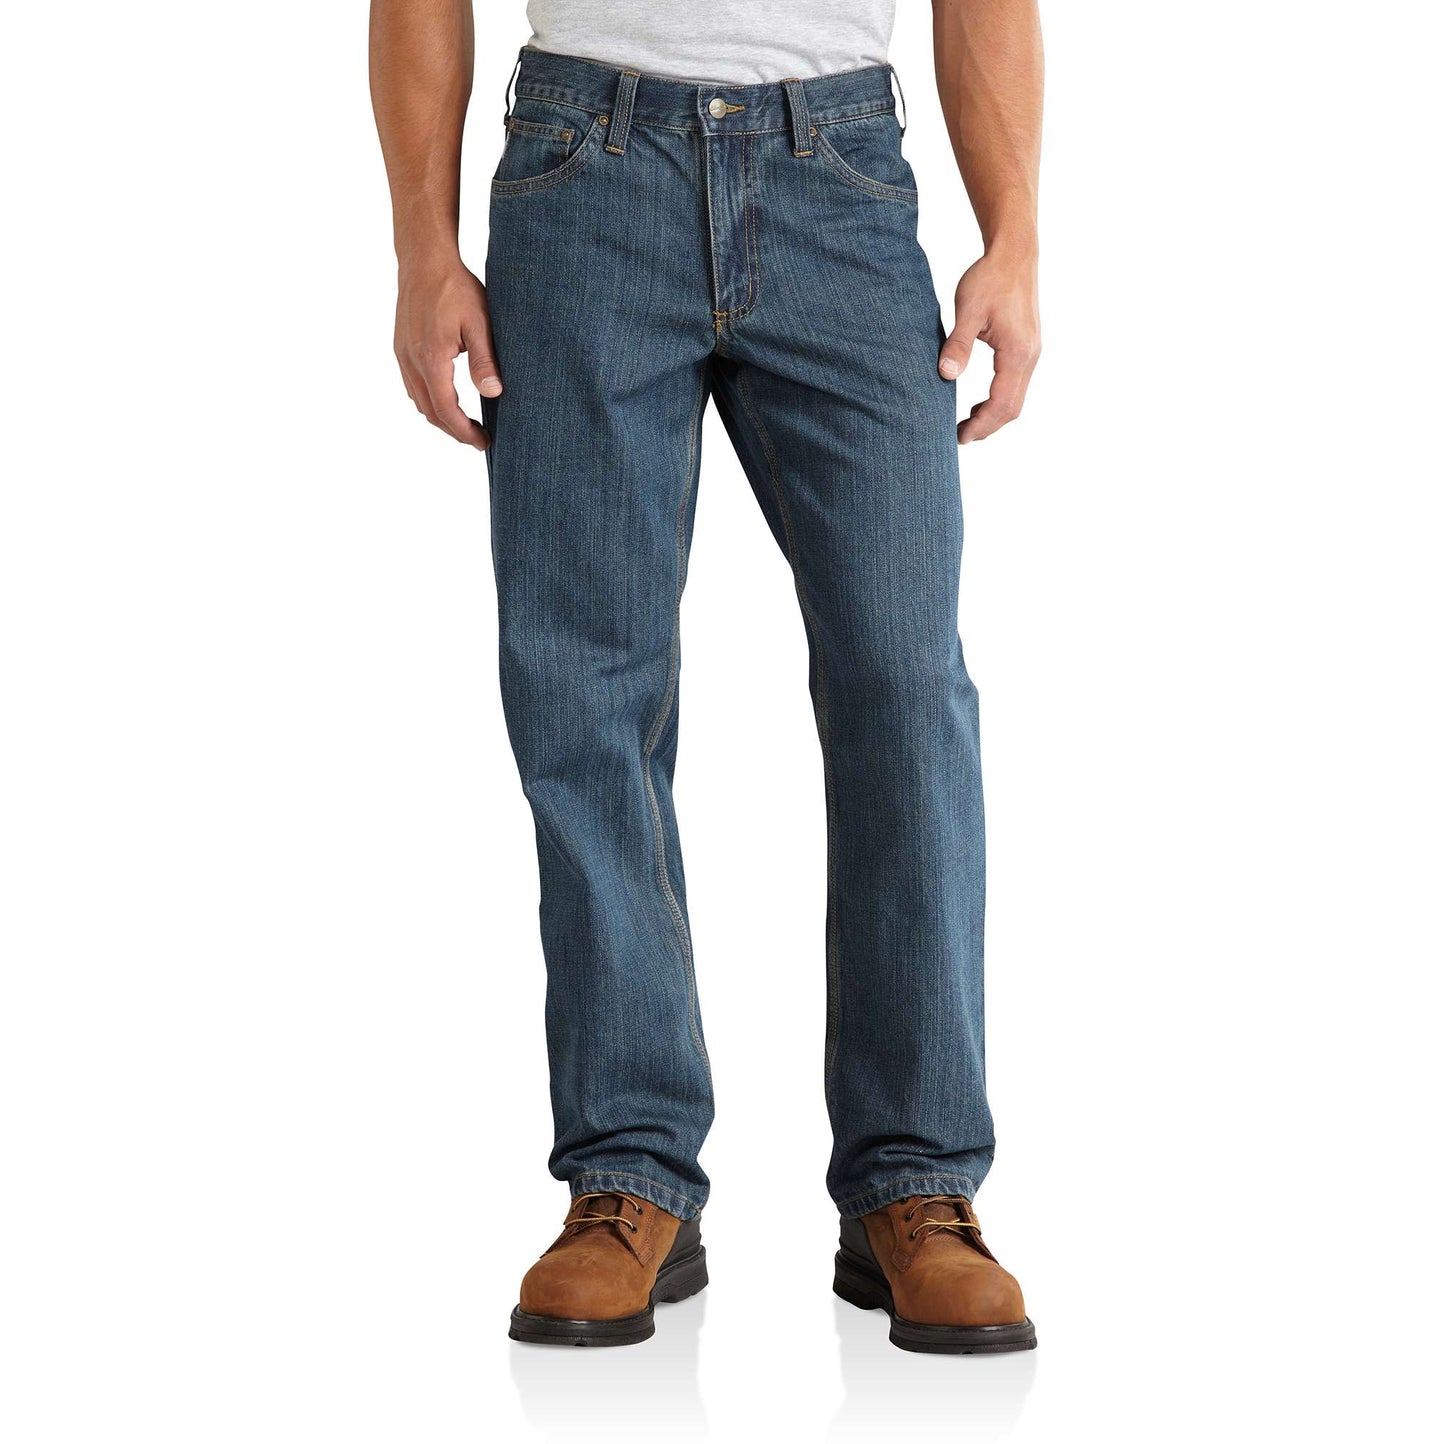 Relaxed-Fit Tipton Jean | Carhartt Reworked